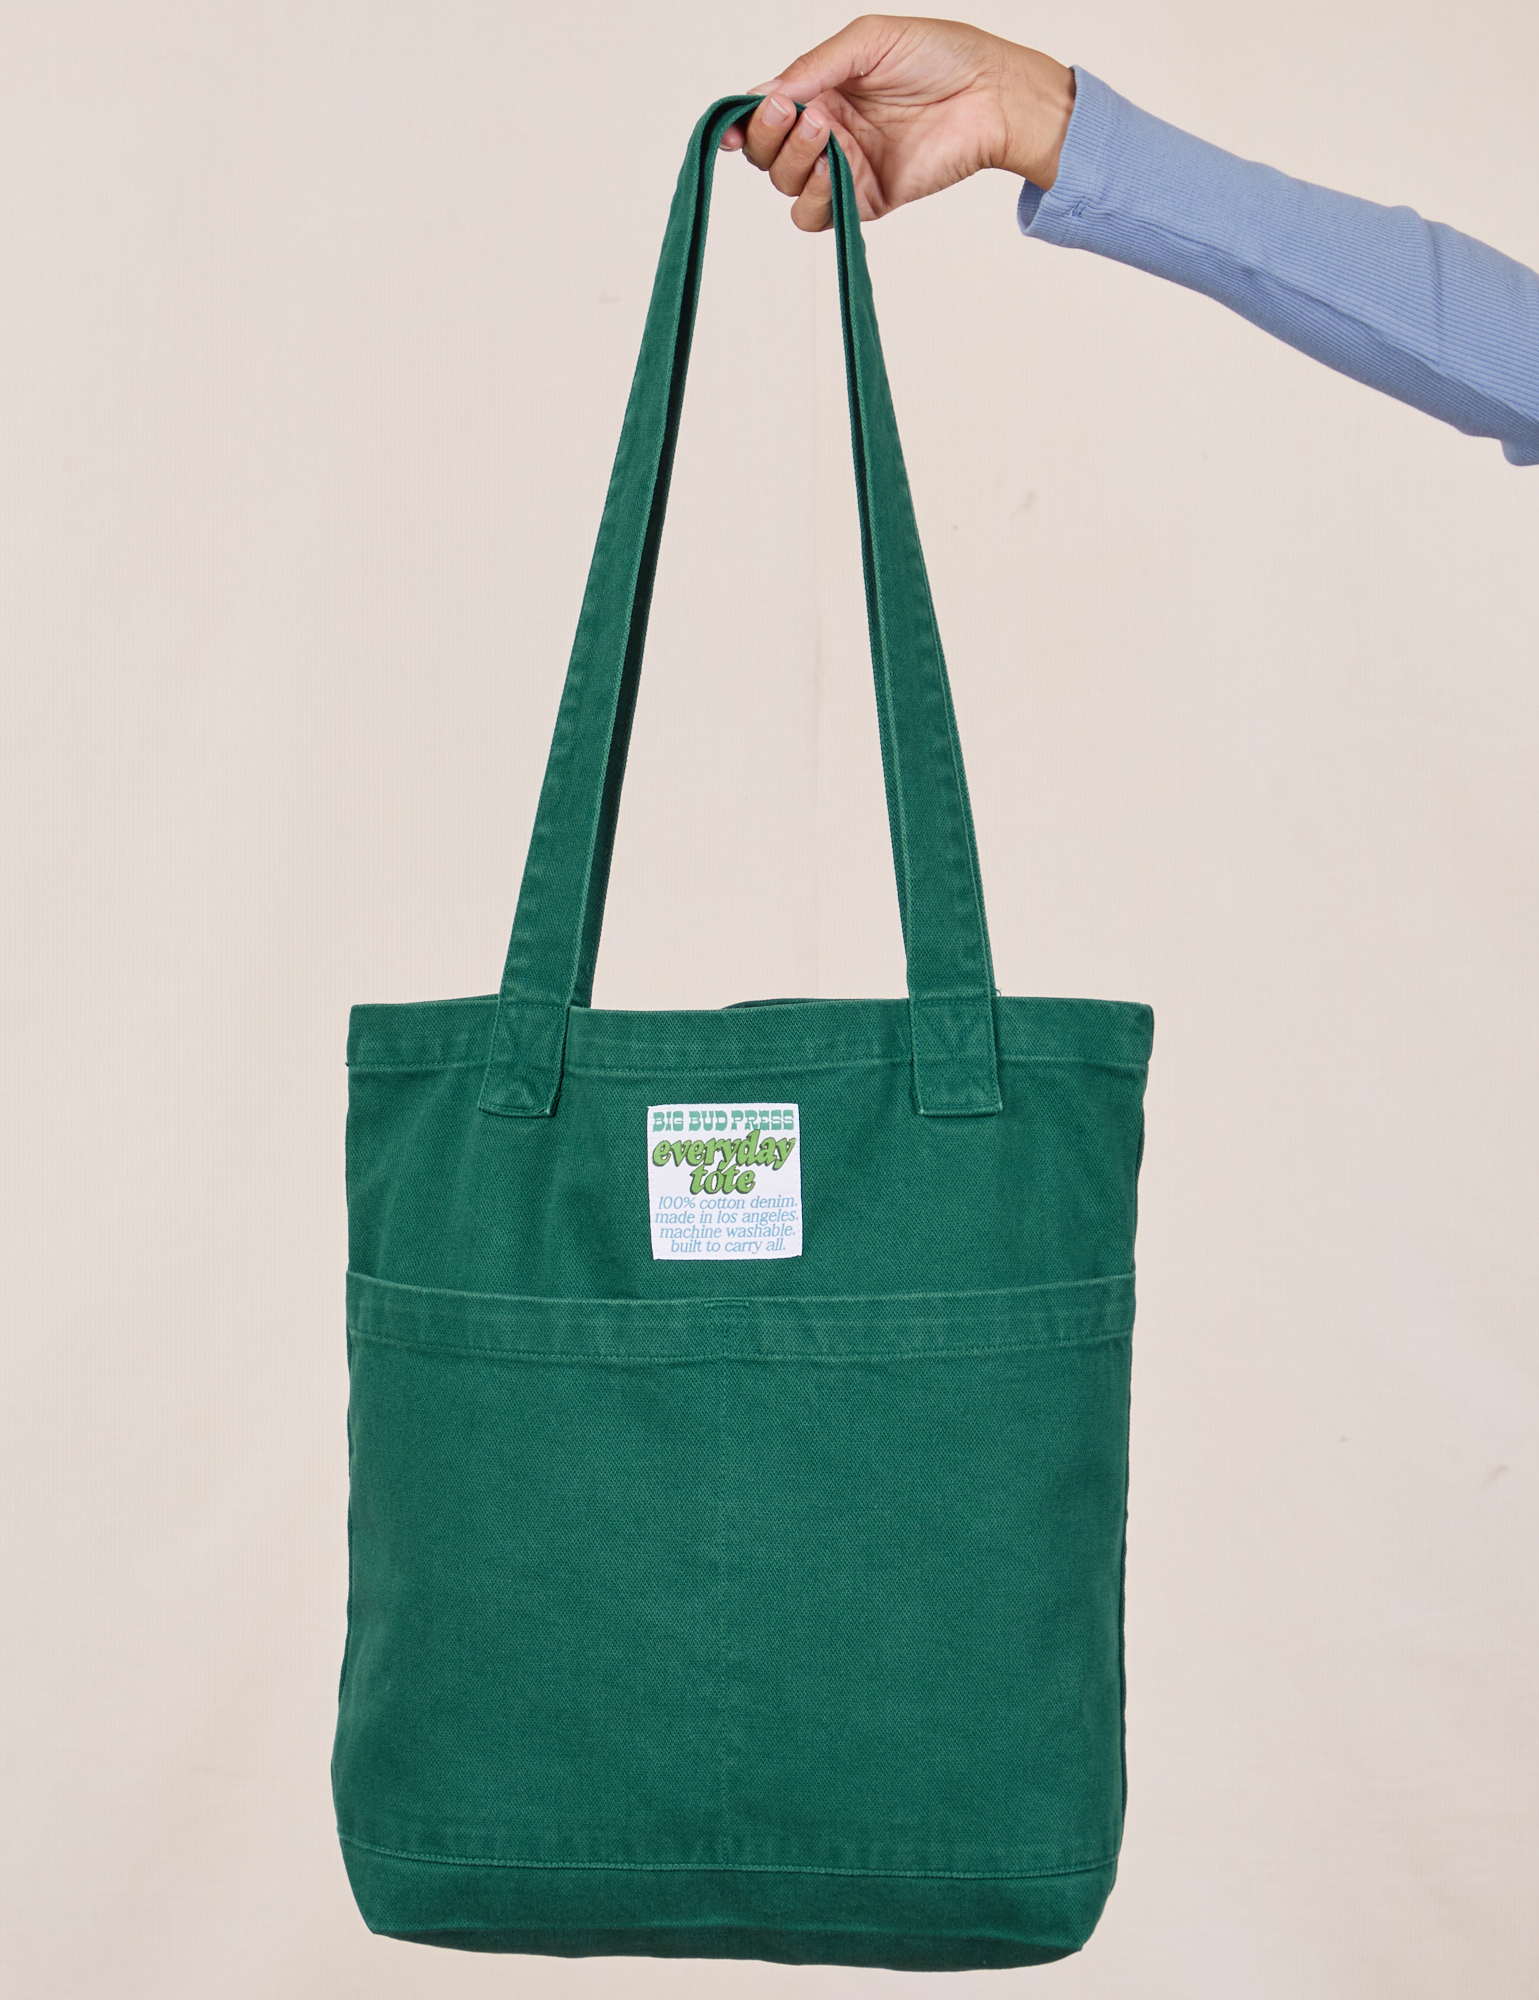 Everyday Tote Bag in Hunter Green